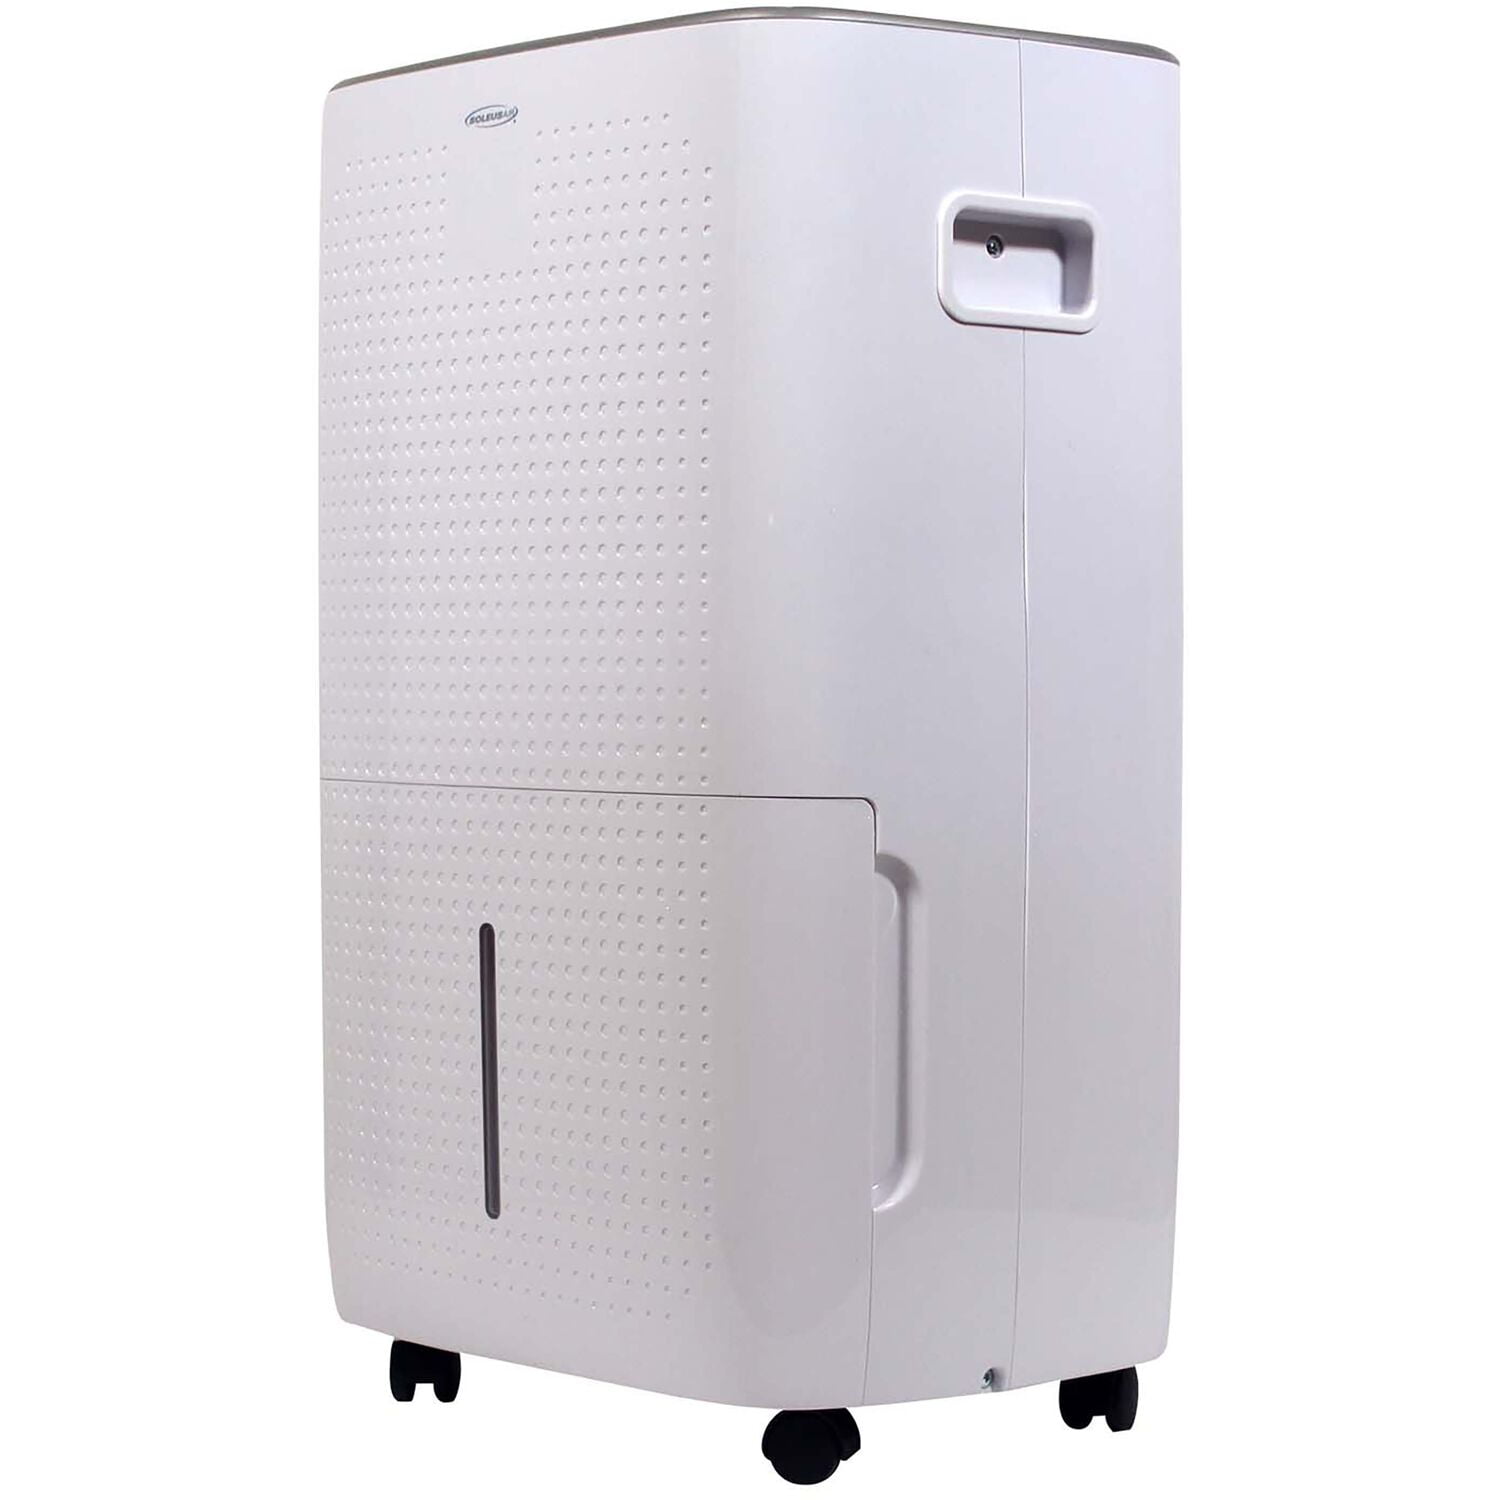 Picture of Soleus DSJ-50EIPW-01 50 Pints Energy Star Rated Dehumidifier Internal Pump, White